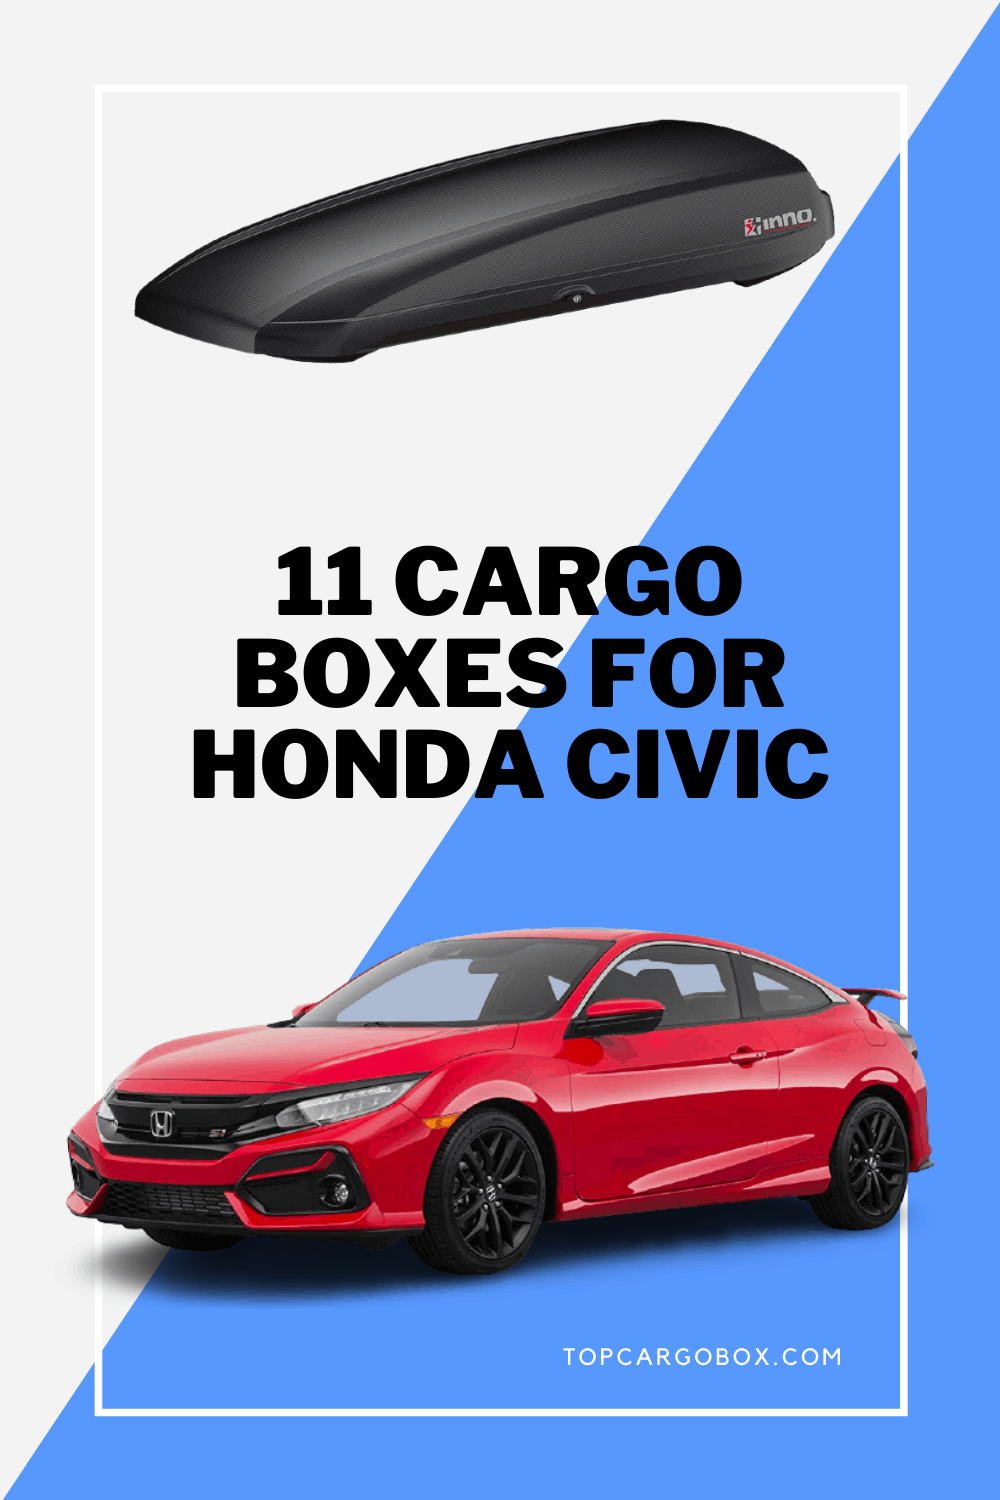 11 cargo carriers for Honda Civic are showcasing in this article for people who is looking for a compatible cargo box for his family and vehicle.